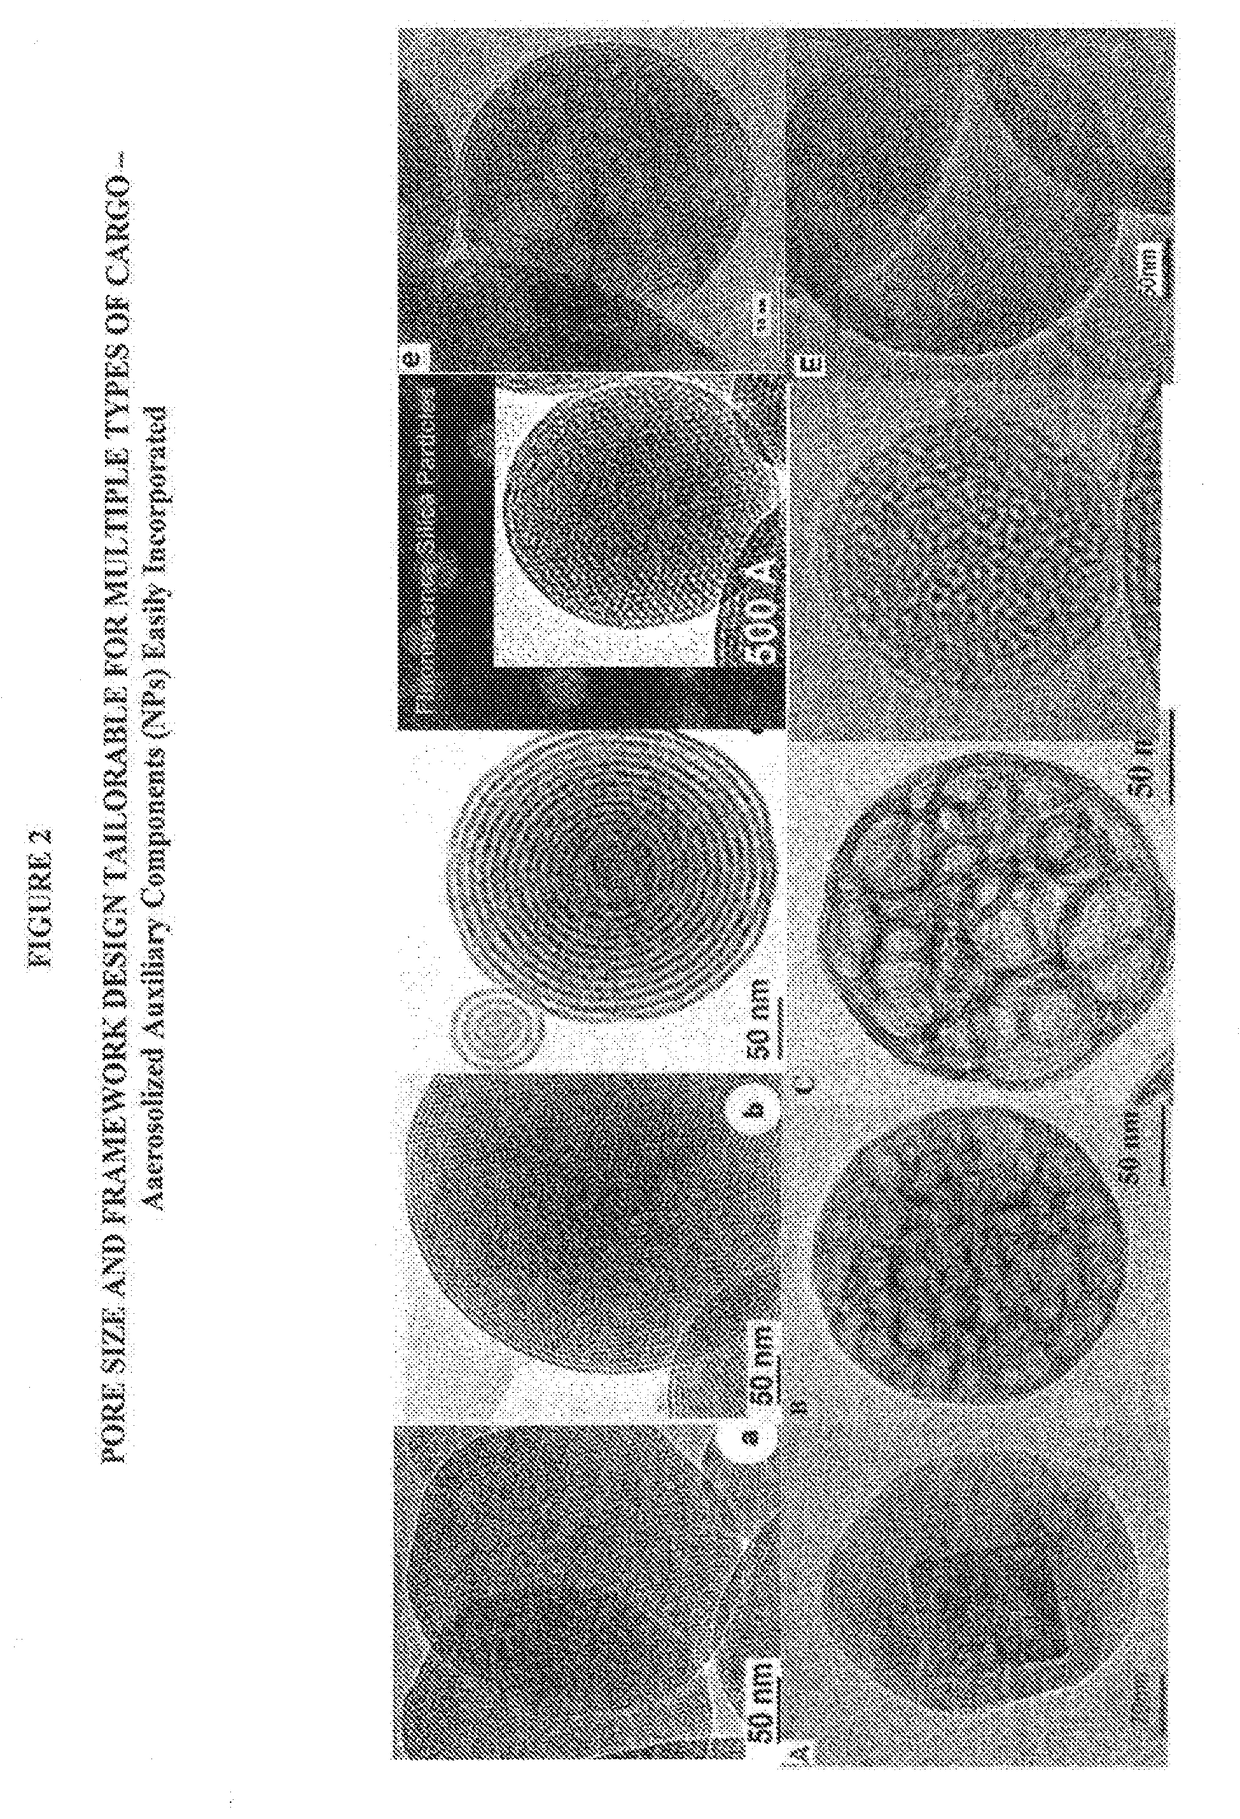 Porous nanoparticle-supported lipid bilayers (protocells) for targeted delivery including transdermal delivery of cargo and methods thereof